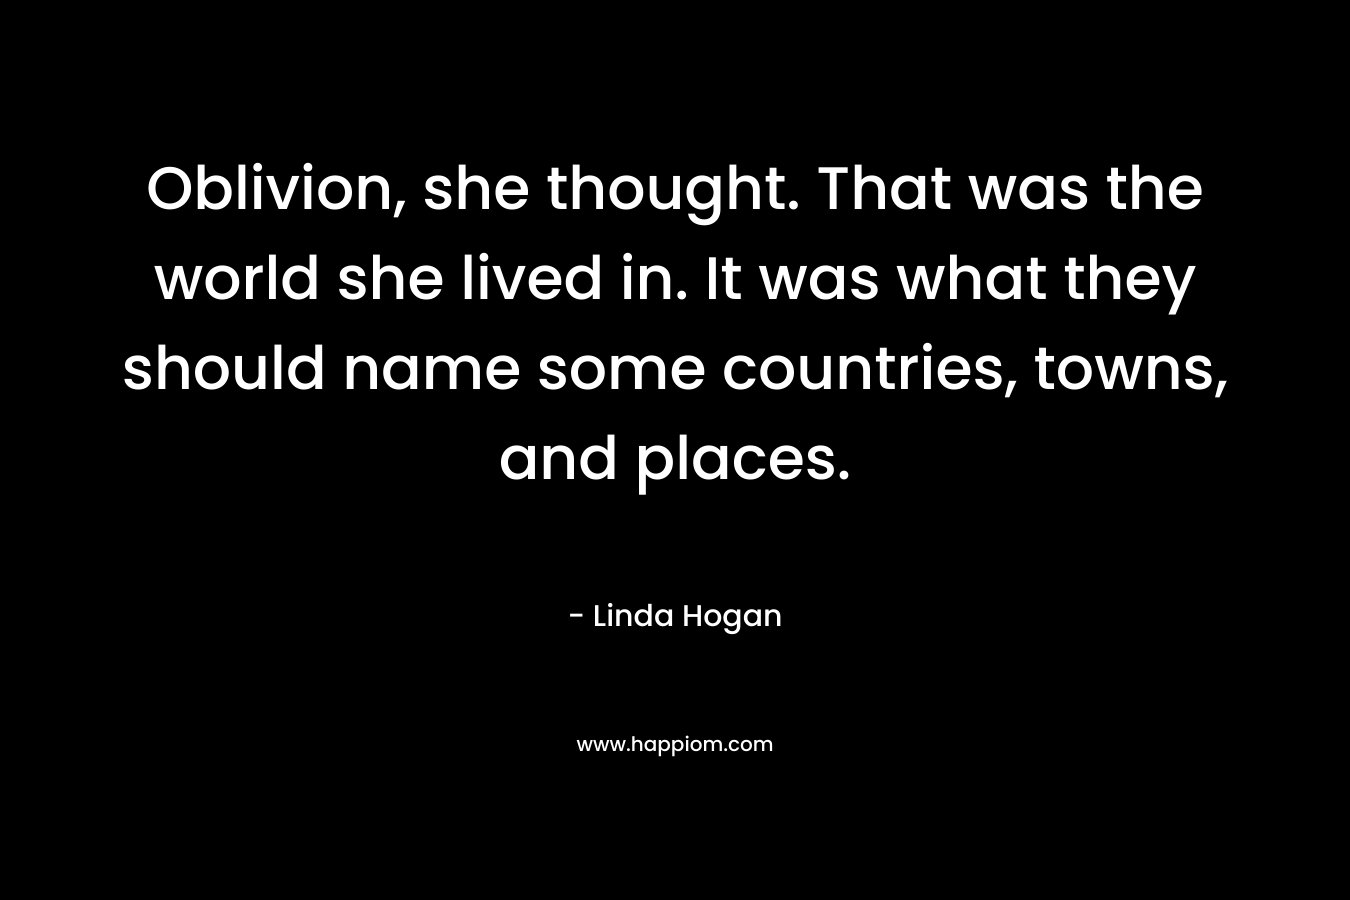 Oblivion, she thought. That was the world she lived in. It was what they should name some countries, towns, and places. – Linda Hogan